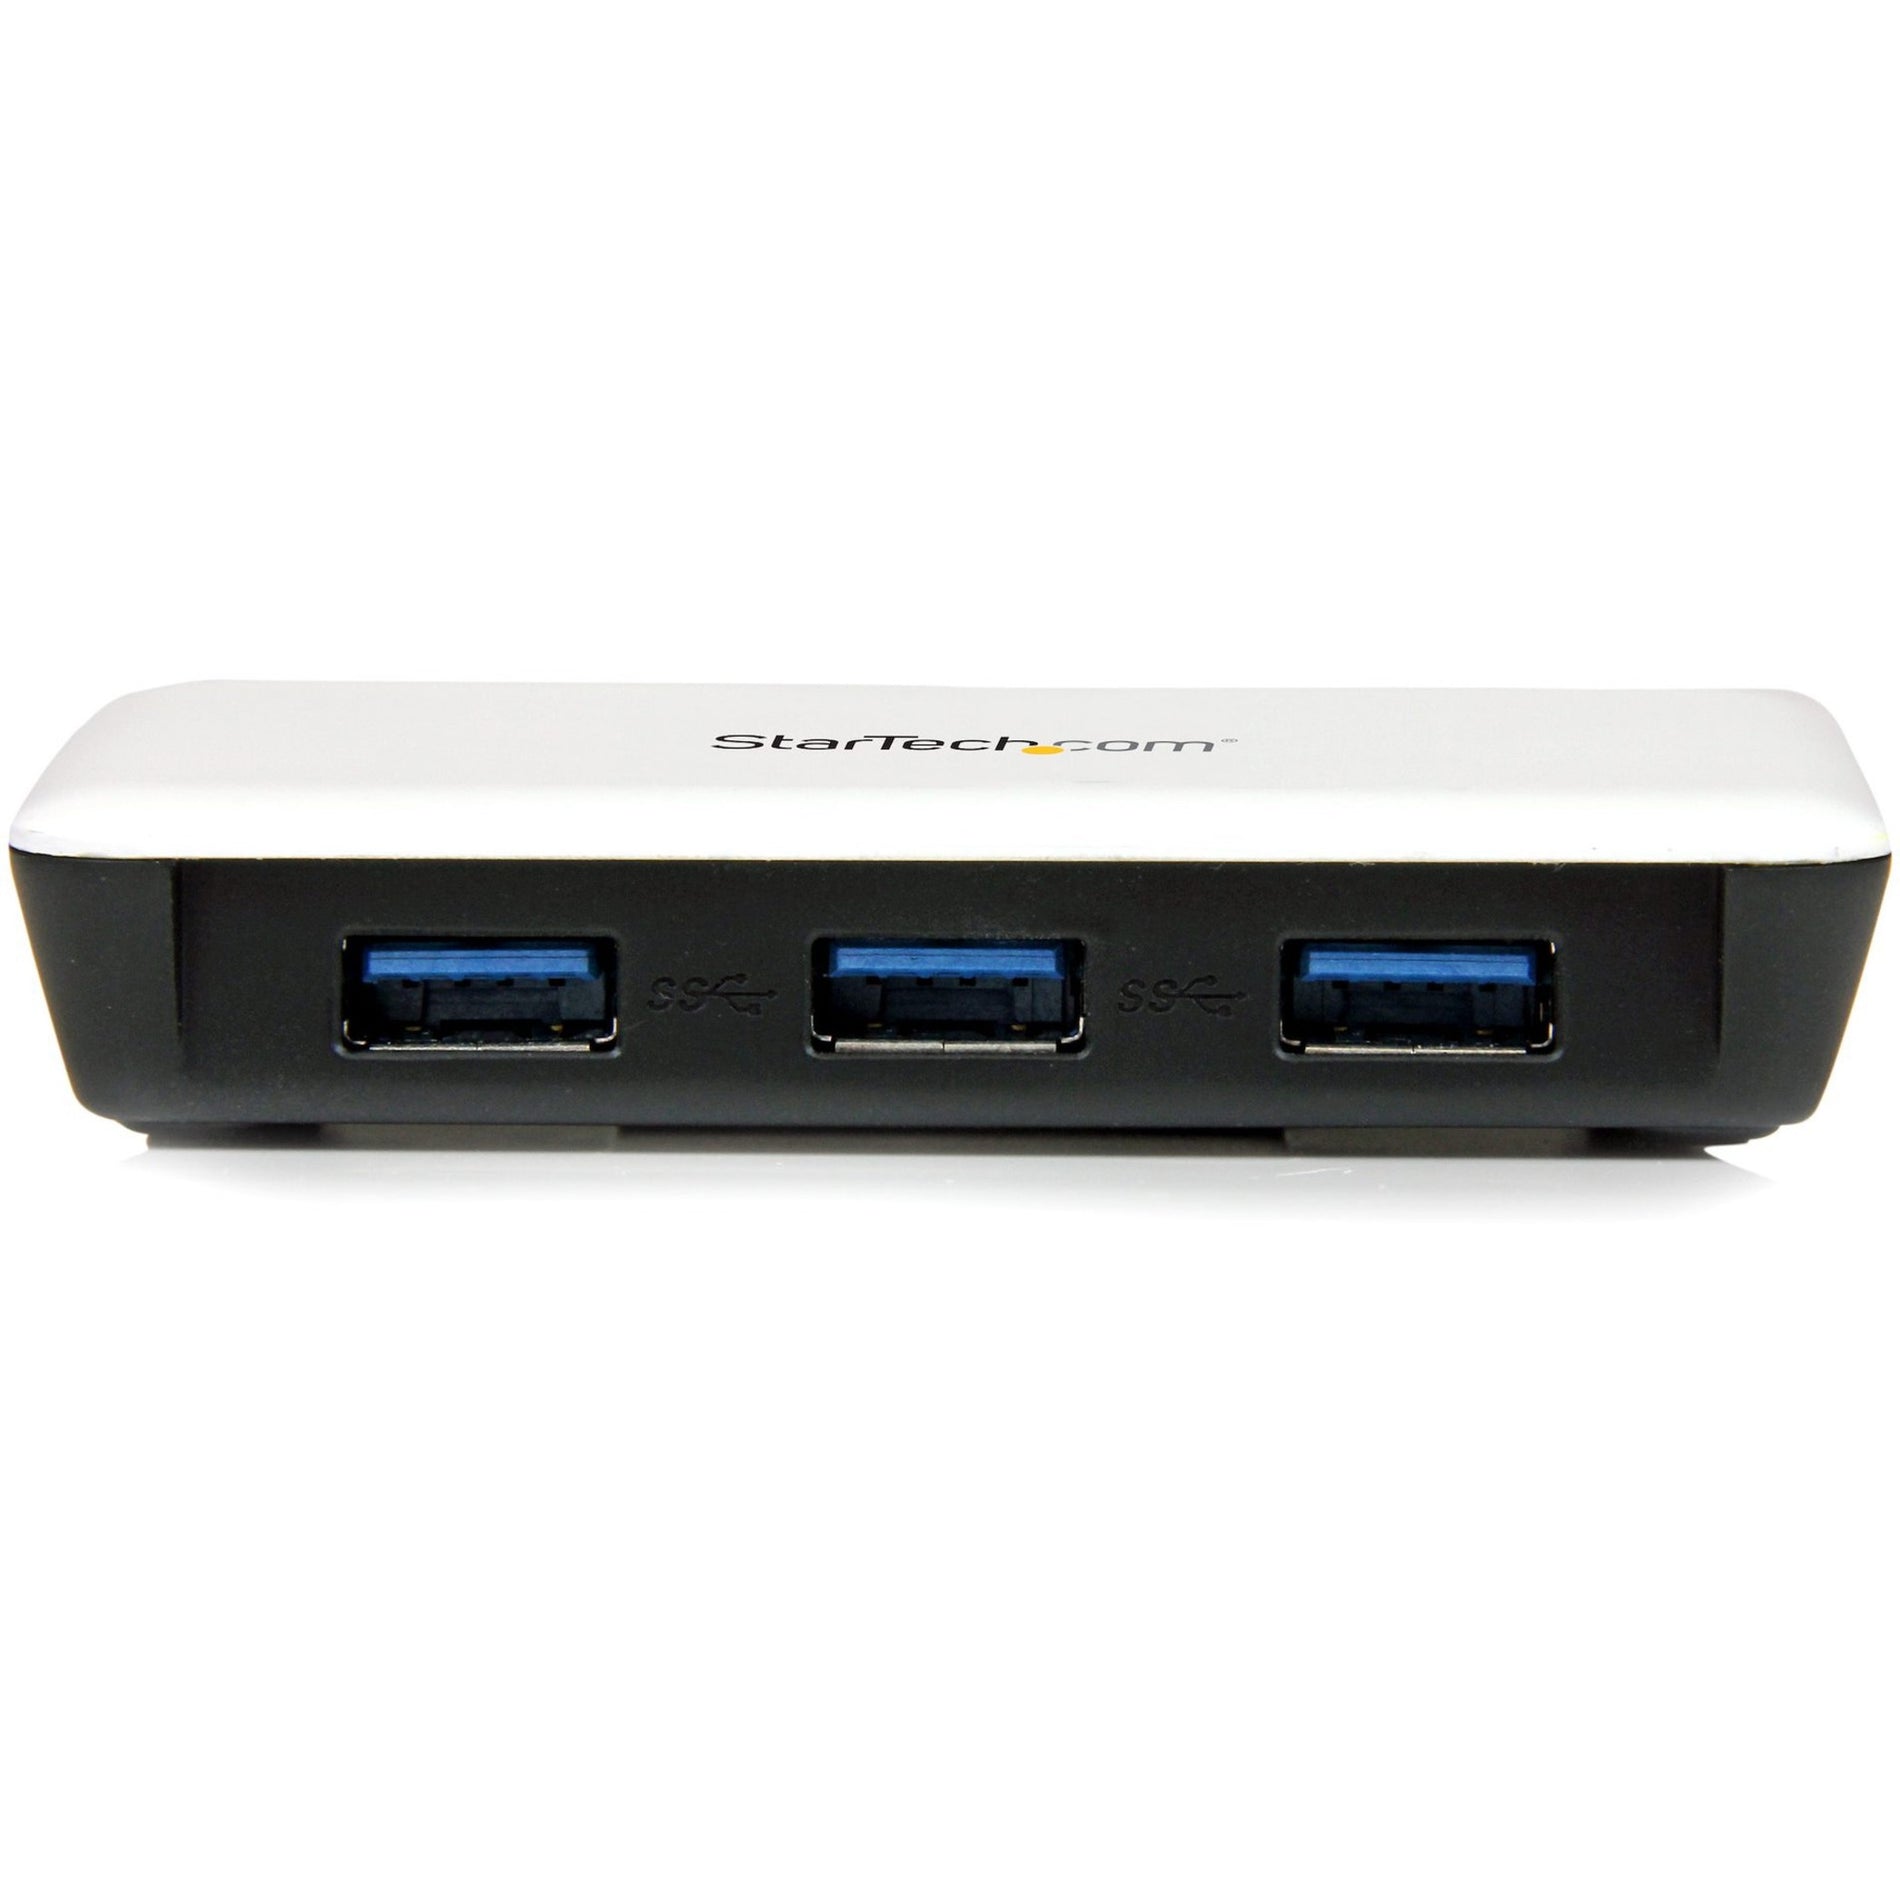 StarTech.com ST3300U3S 3 Port SuperSpeed USB 3.0 Hub with Gigabit Ethernet, Expand Your USB Connectivity and Network Capabilities